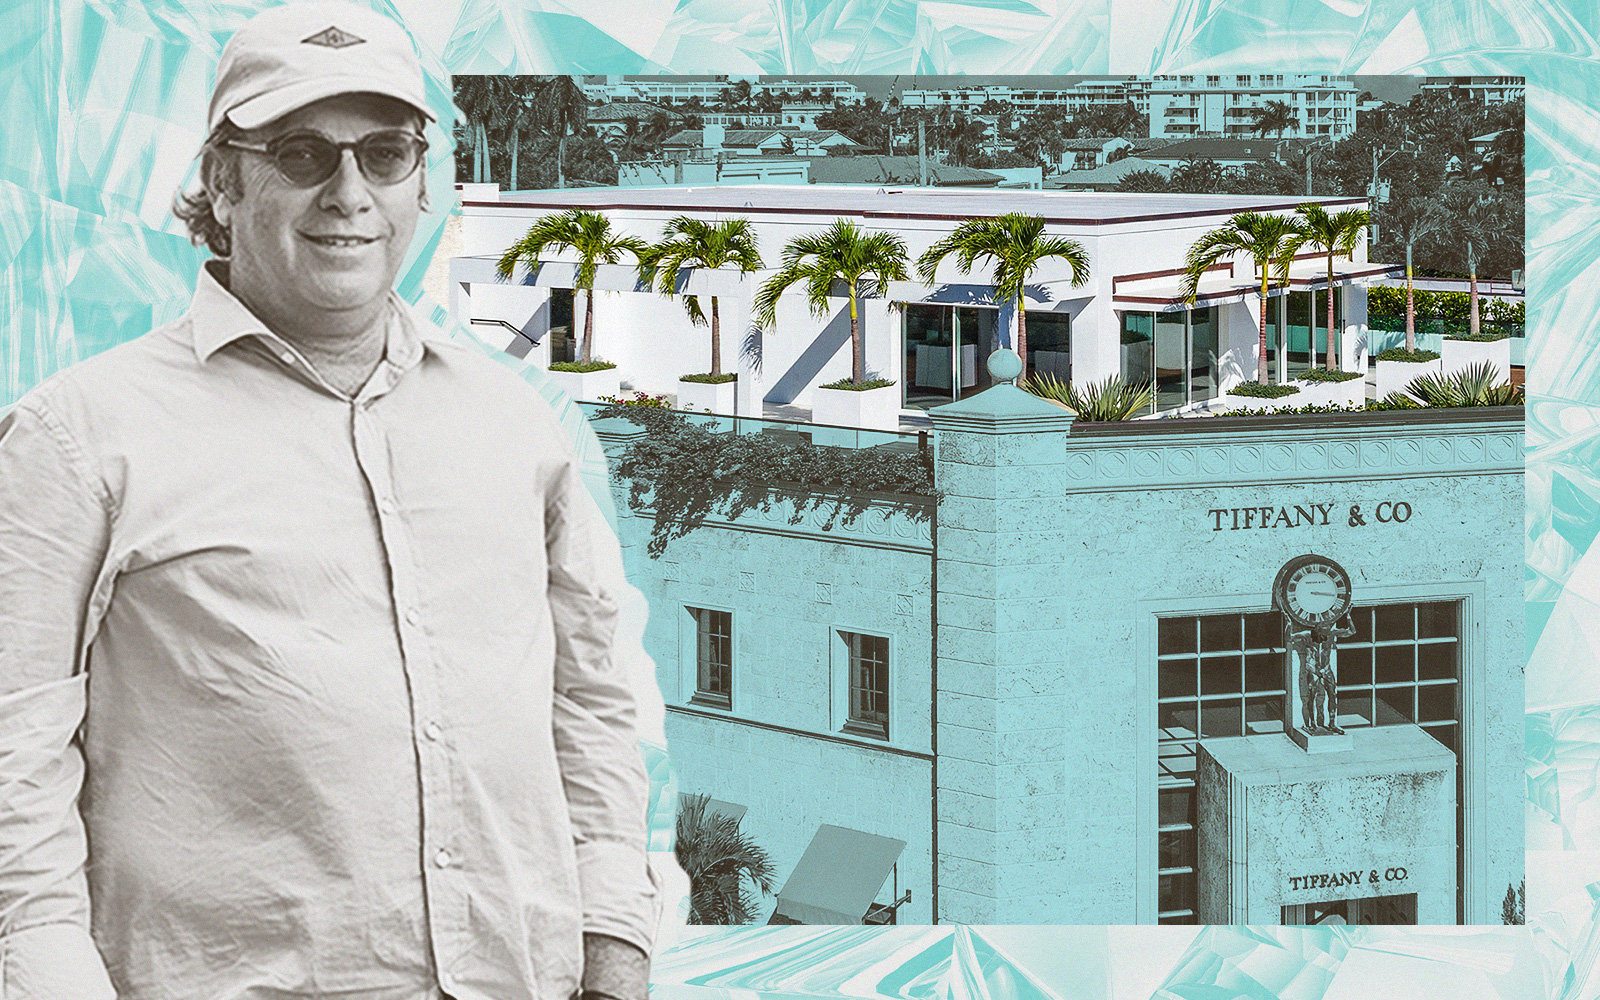 Auto dealership mogul Terry Taylor pays $18M for Palm Beach PH above Tiffany 